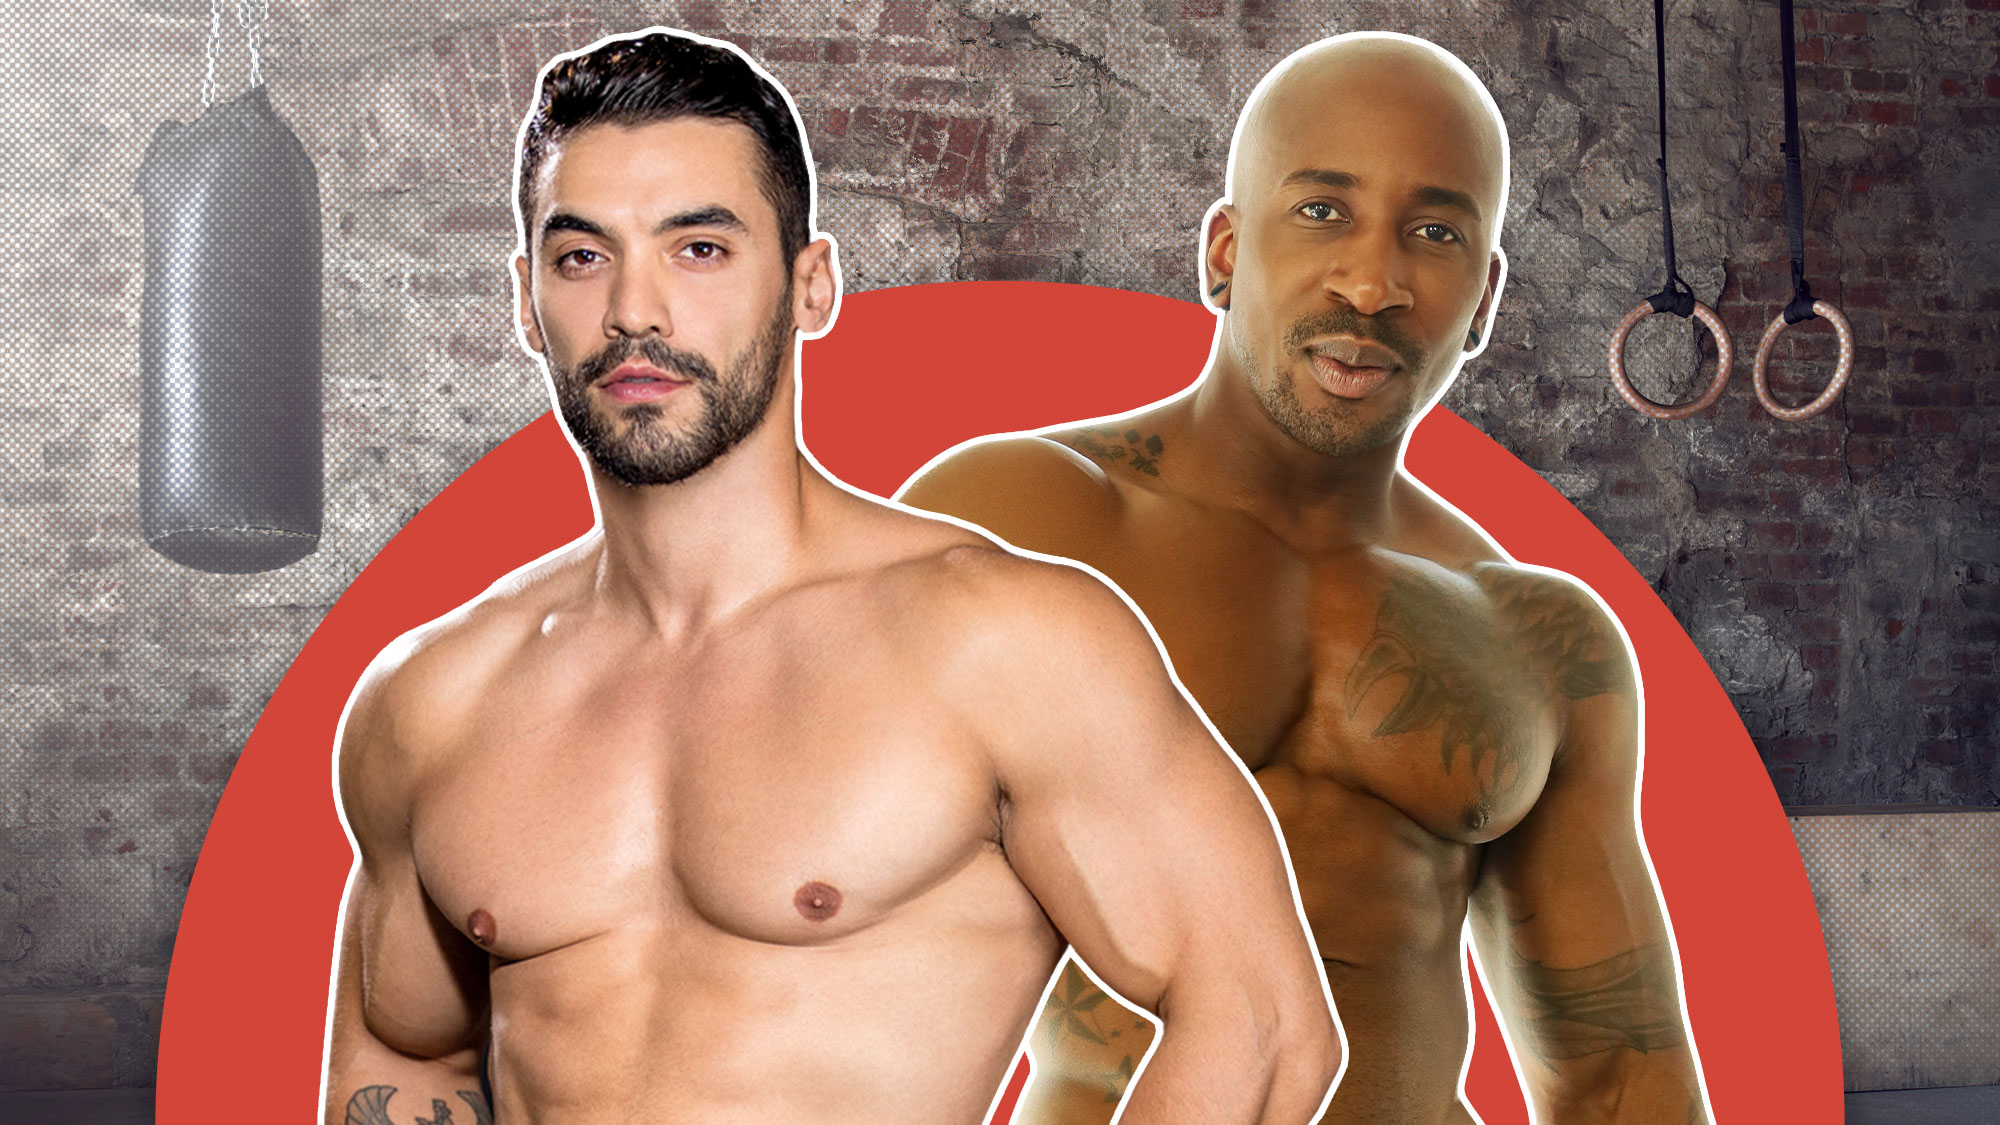 The 15 Hottest Muscle Bodies In Gay Porn Right Now - TheSword.com